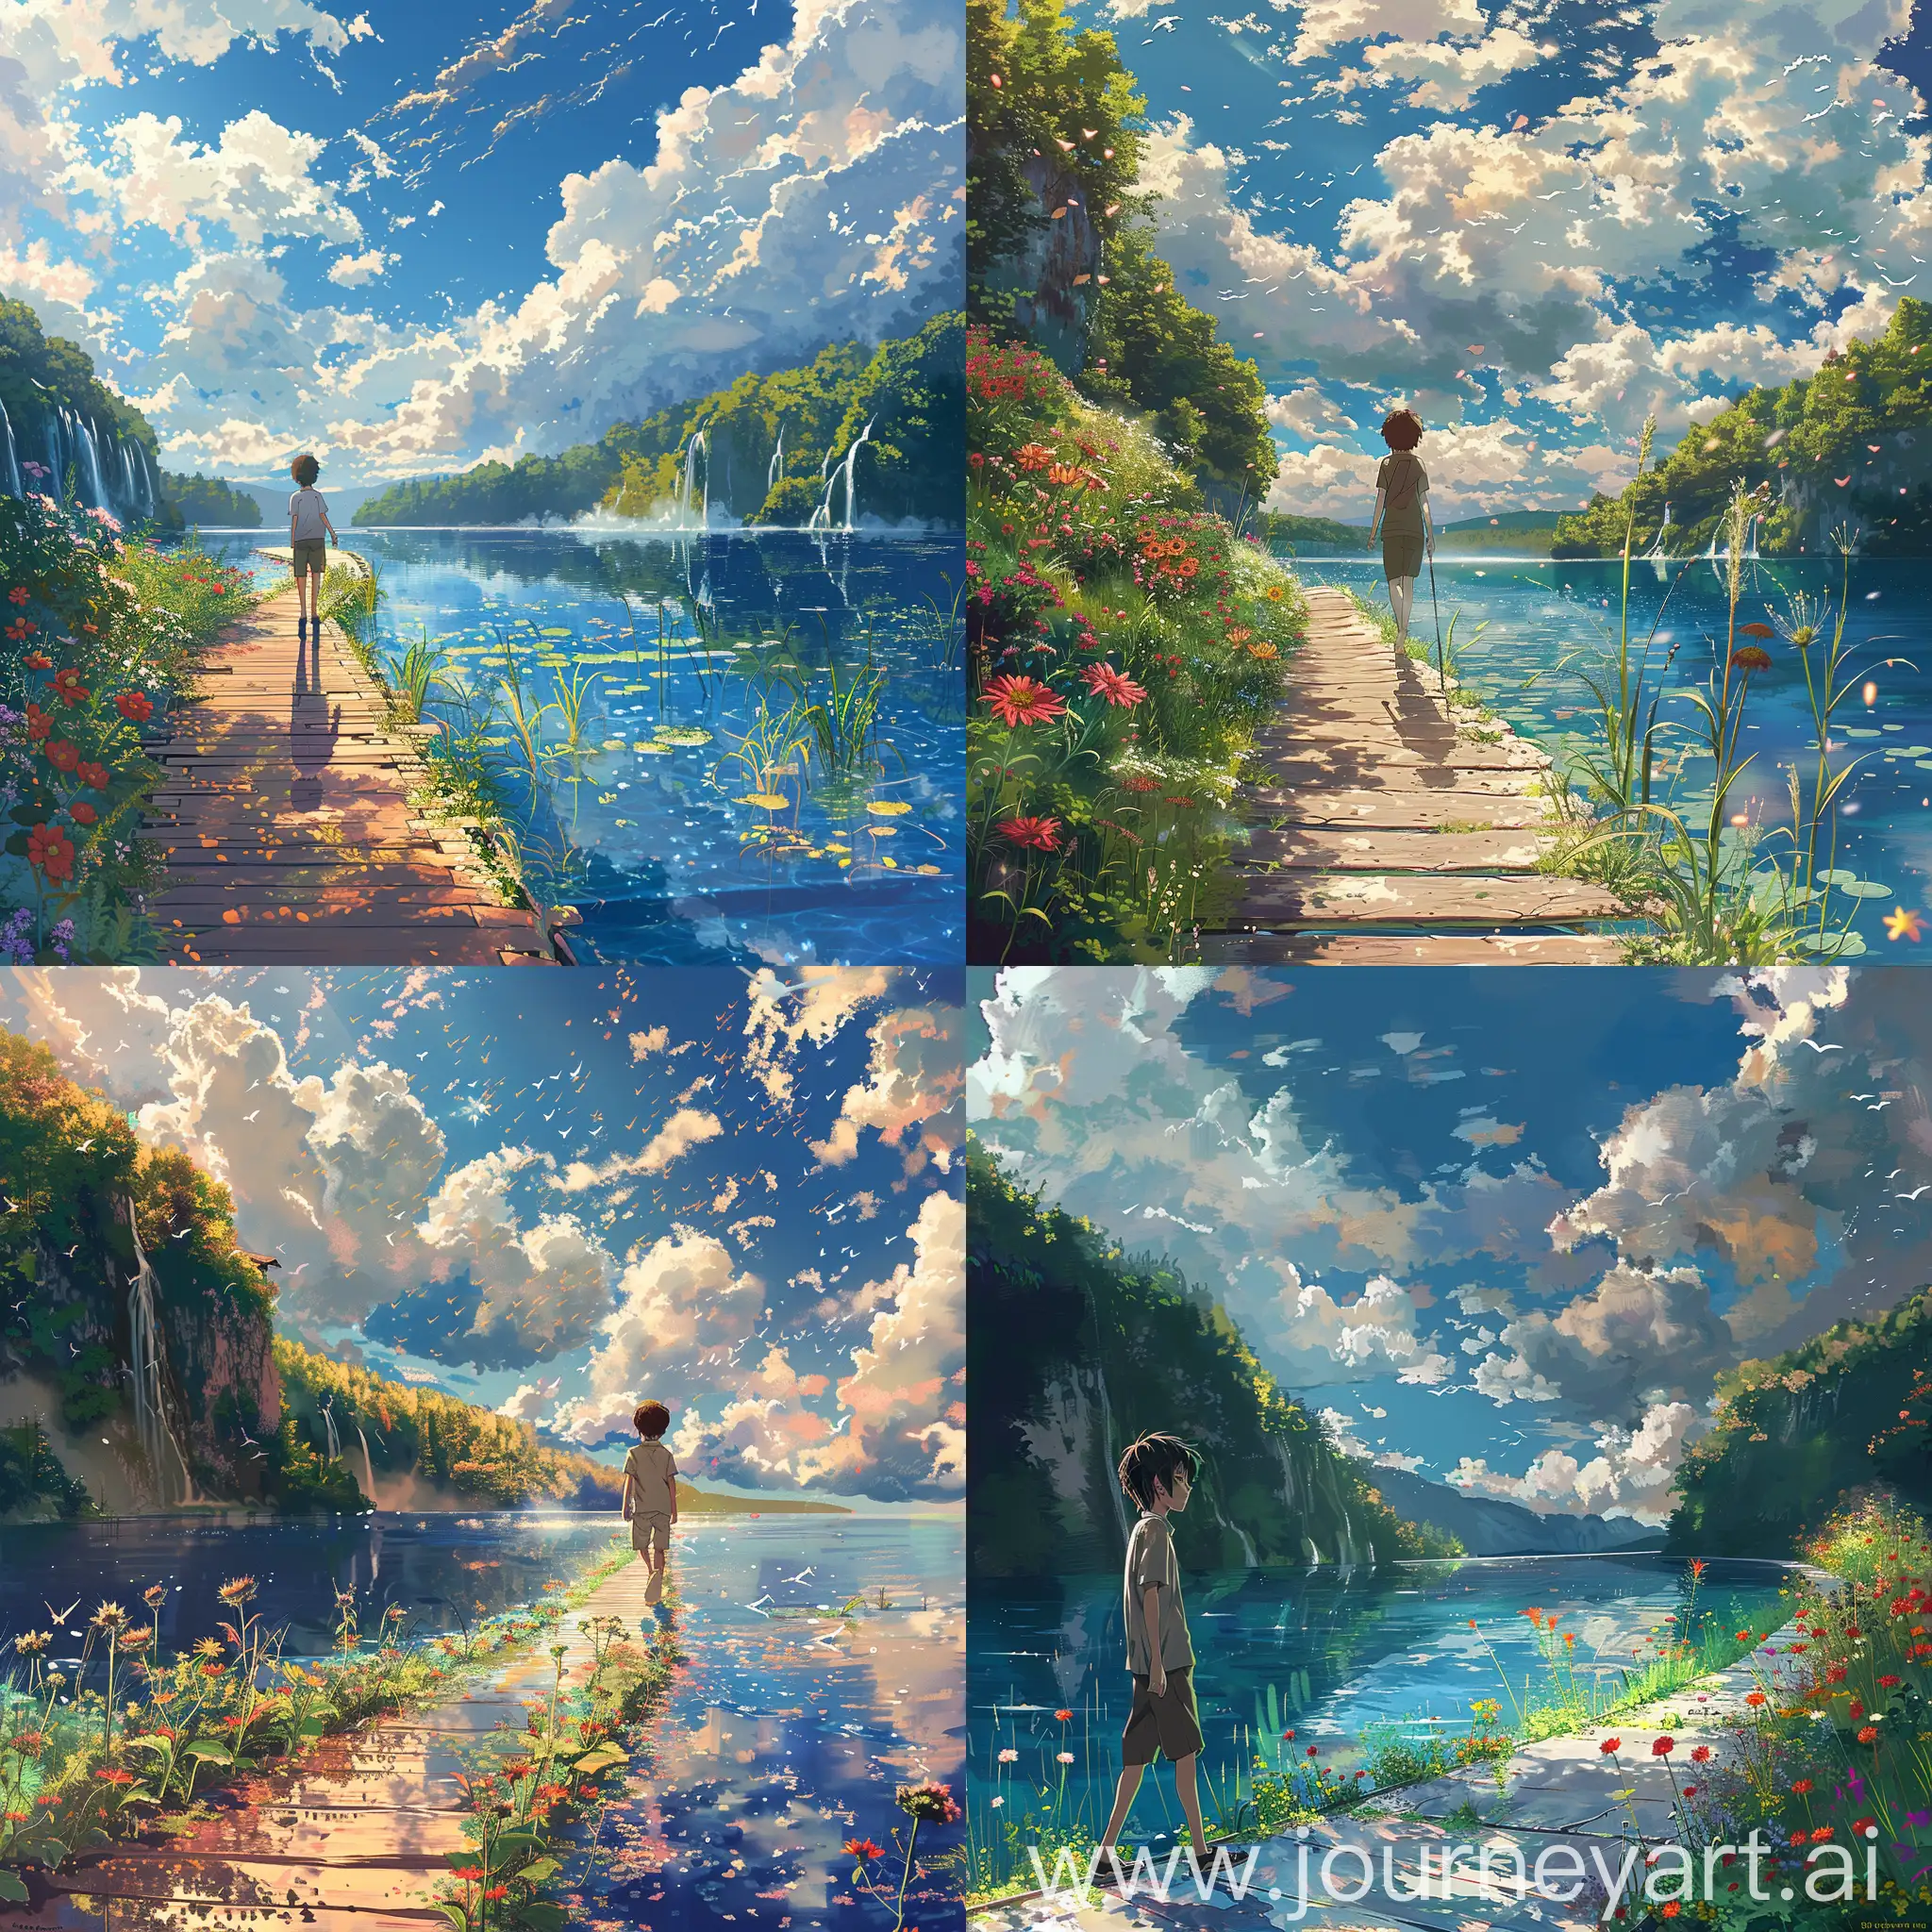 anime, boy walking down a walk way, side profile, Makoto Shinkai style, lost in the wonders of nature, where air and water have a seamless flow, clouds are fluffy, sky is beautiful, vibrant flowers, a little bit of grass, inspired from one of the most beautiful walkways in the world. Plitvice Lakes National Park, Croatia, everything is highly detailed, water is beautiful, nature's wond